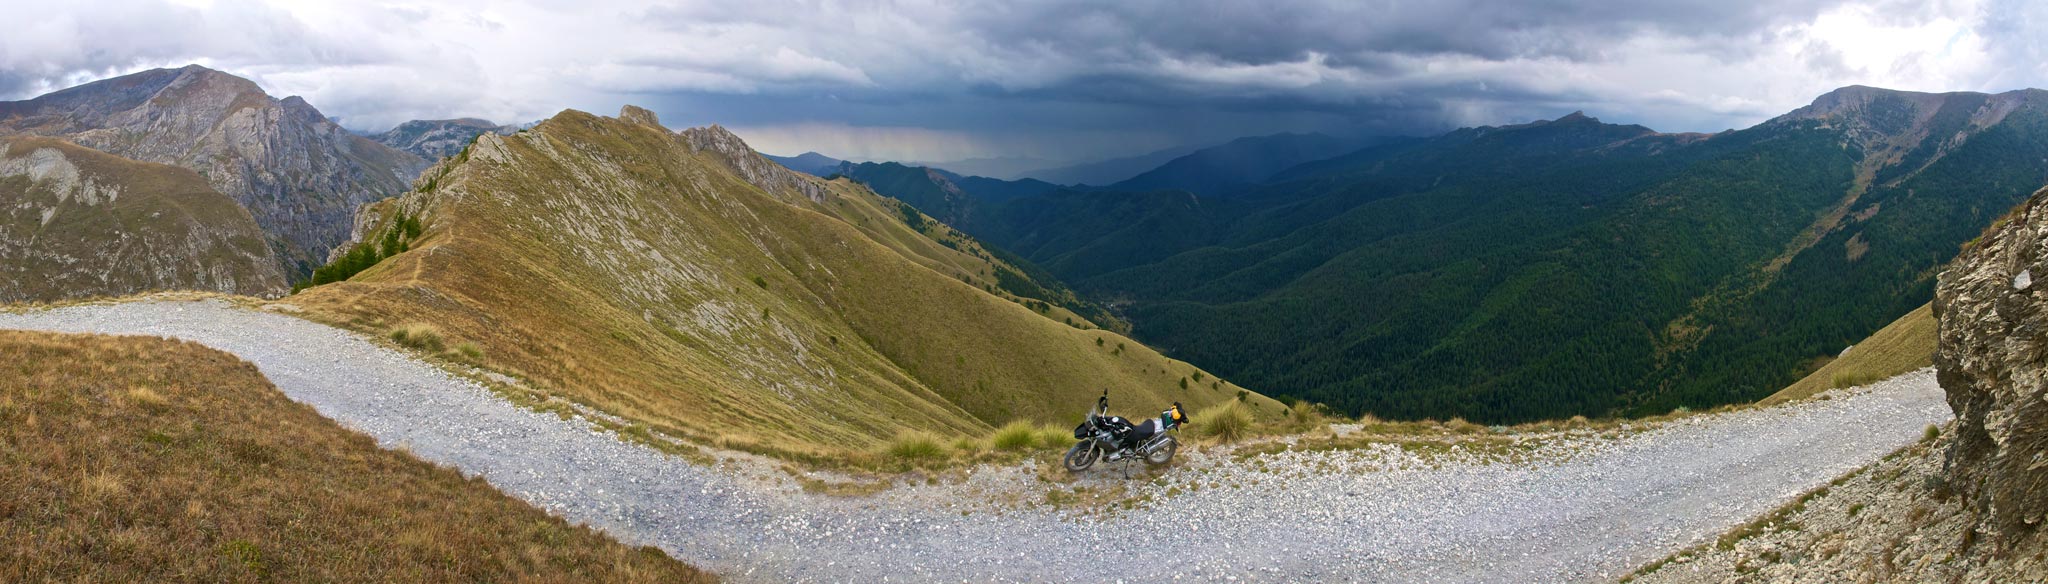 Panorama of bike on a mountain track, thunderstorm in distance